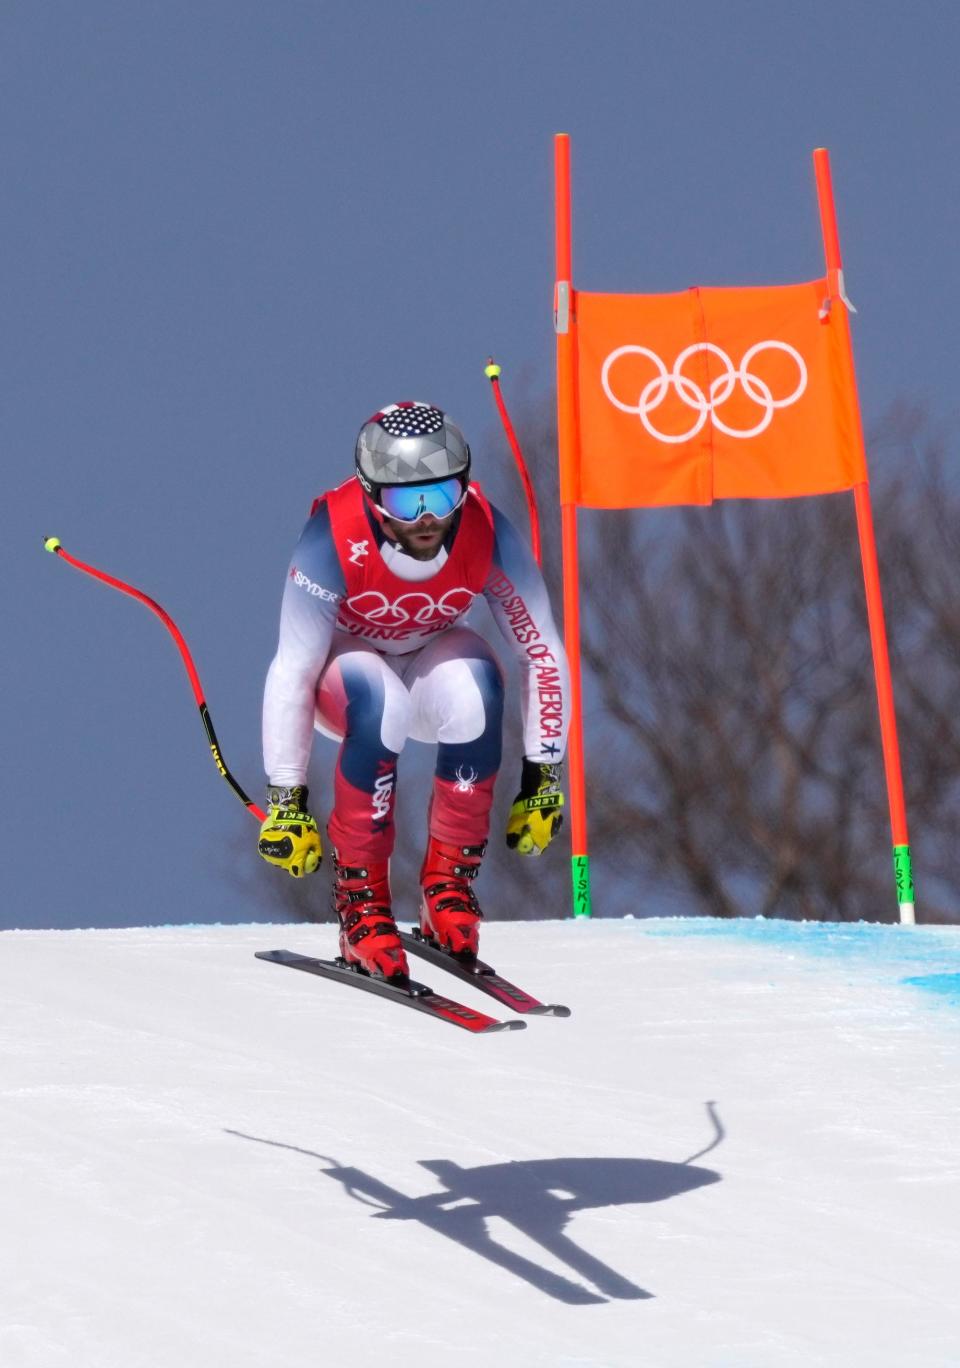 Travis Ganong (USA) in the men's downhill alpine skiing race during the Beijing 2022 Olympic Winter Games at Yanqing Alpine Skiing Centre, Feb. 7, 2022.